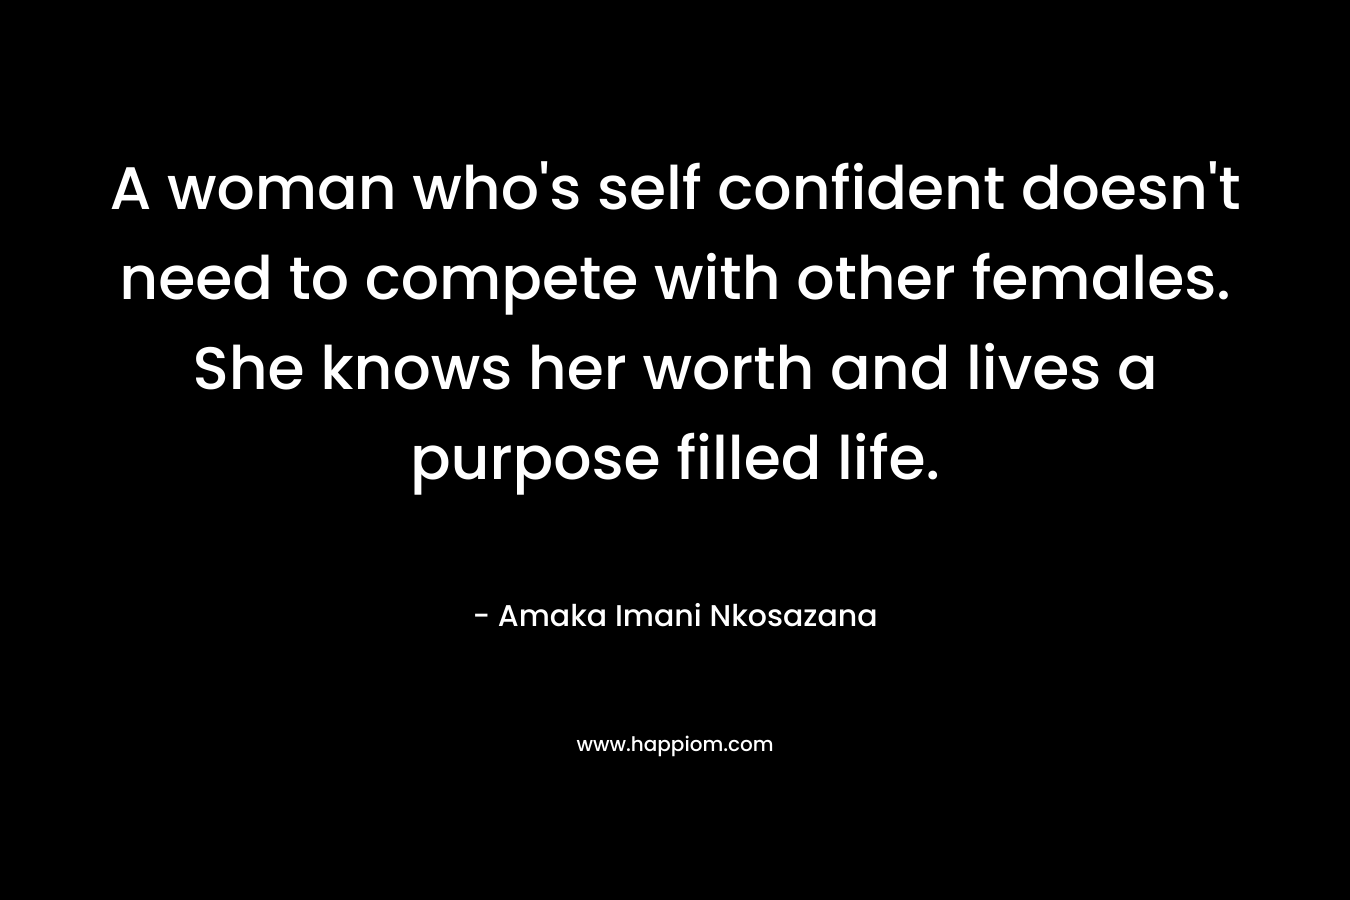 A woman who's self confident doesn't need to compete with other females. She knows her worth and lives a purpose filled life.